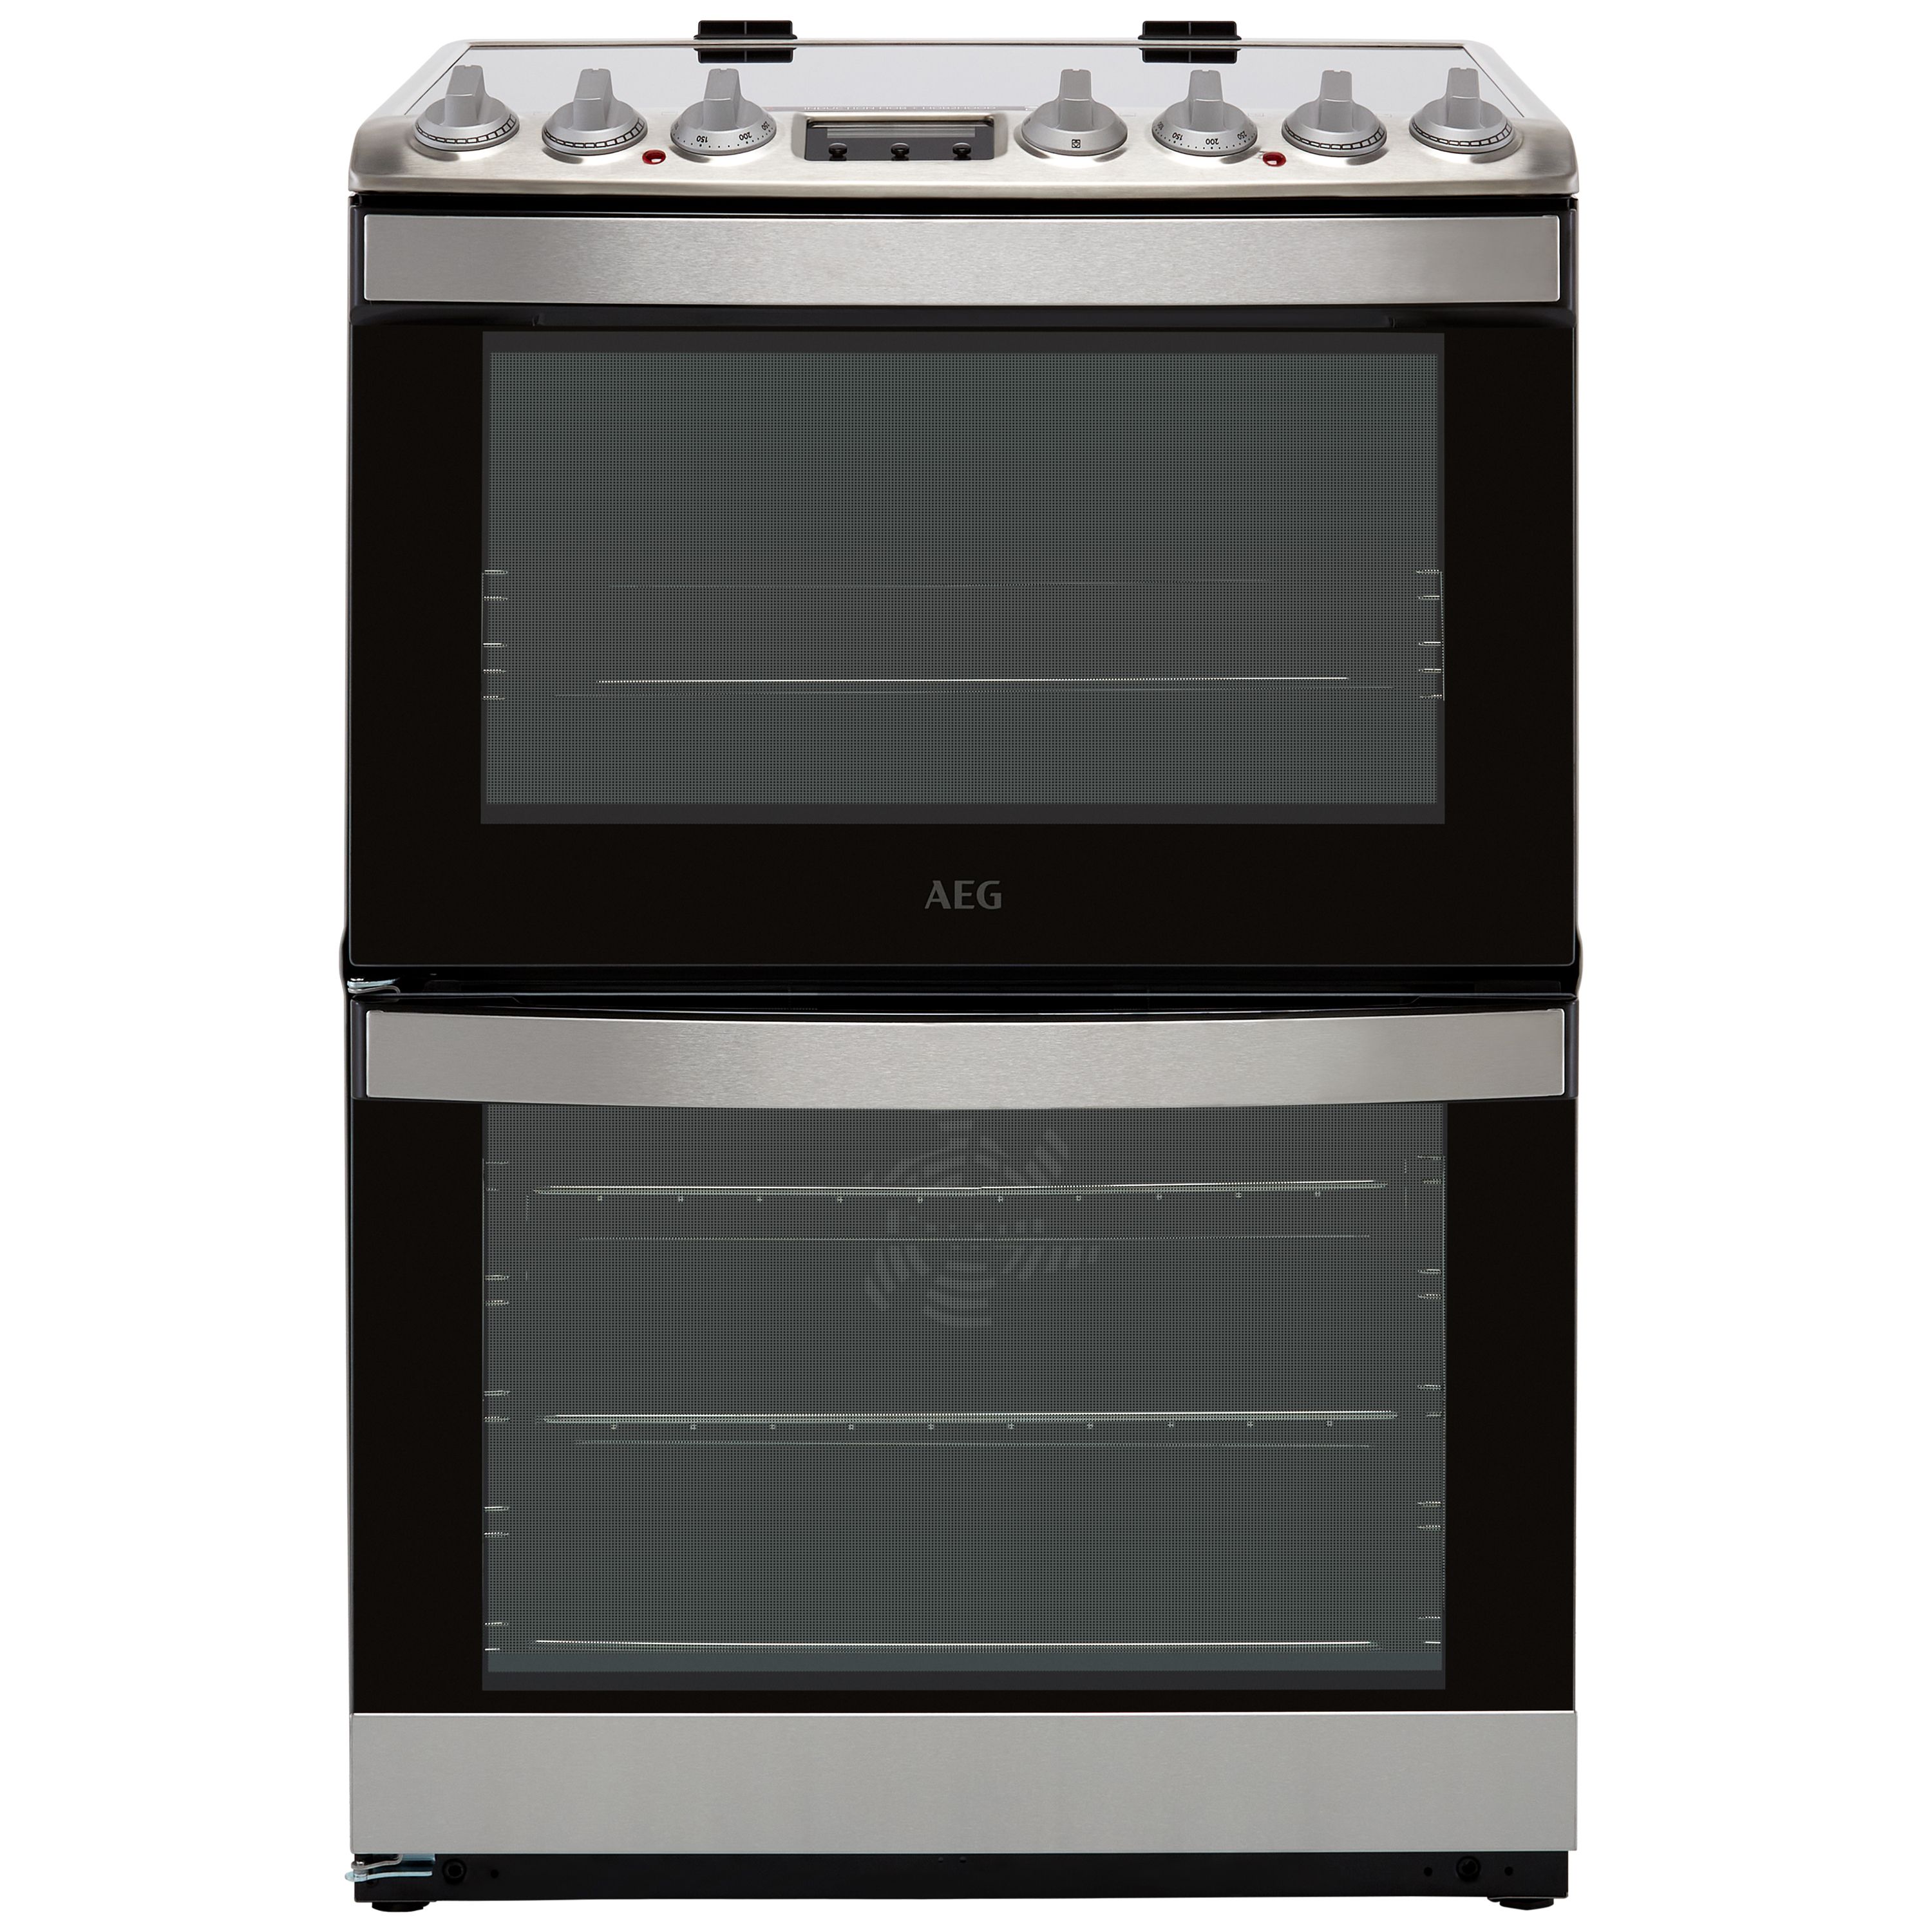 AEG CIB6732ACM_SS 60cm Double Electric Cooker with Induction Hob - Stainless Steel